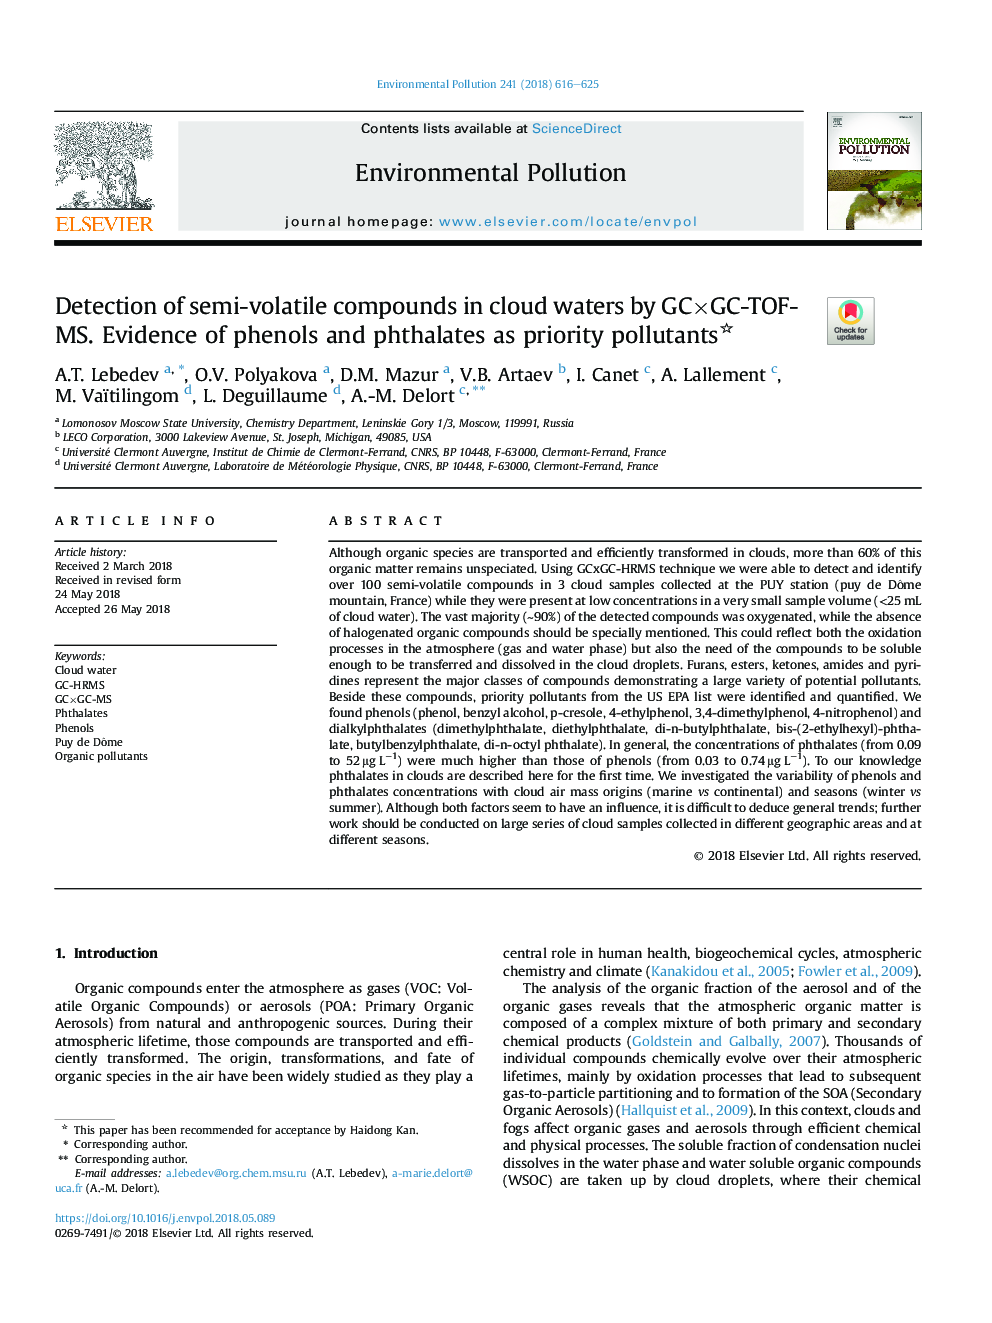 Detection of semi-volatile compounds in cloud waters by GCÃGC-TOF-MS. Evidence of phenols and phthalates as priority pollutants